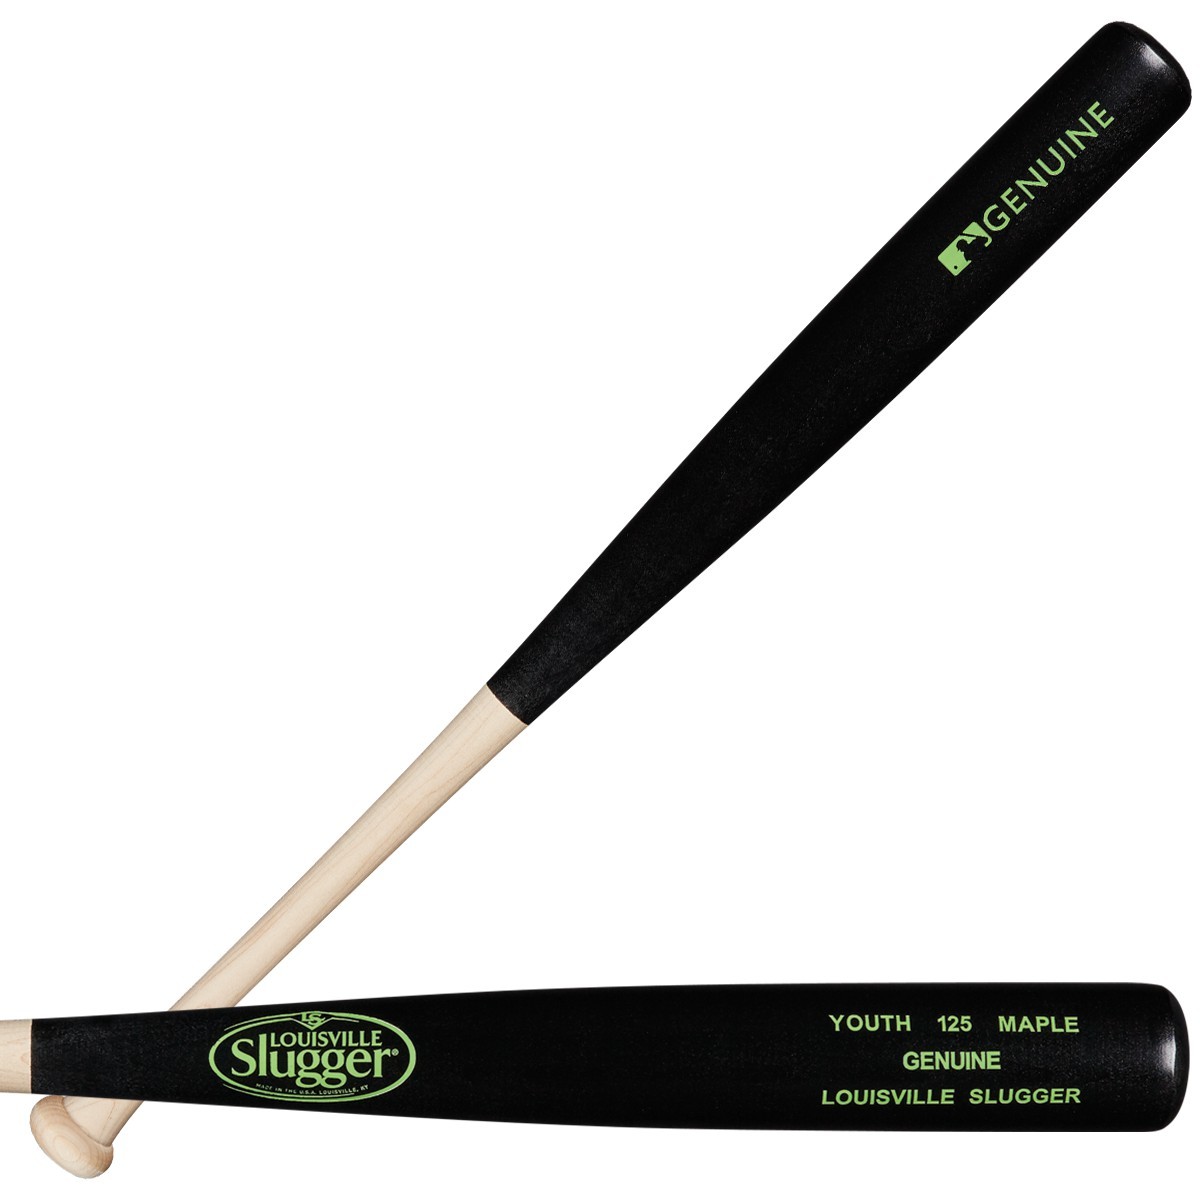 louisville-slugger-youth-125-maple-genuine-wood-baseball-bat-29-inch WTLWYM125A1629 Louisville 887768509057 <span>Priced for every budget and built from dependable maple wood youth